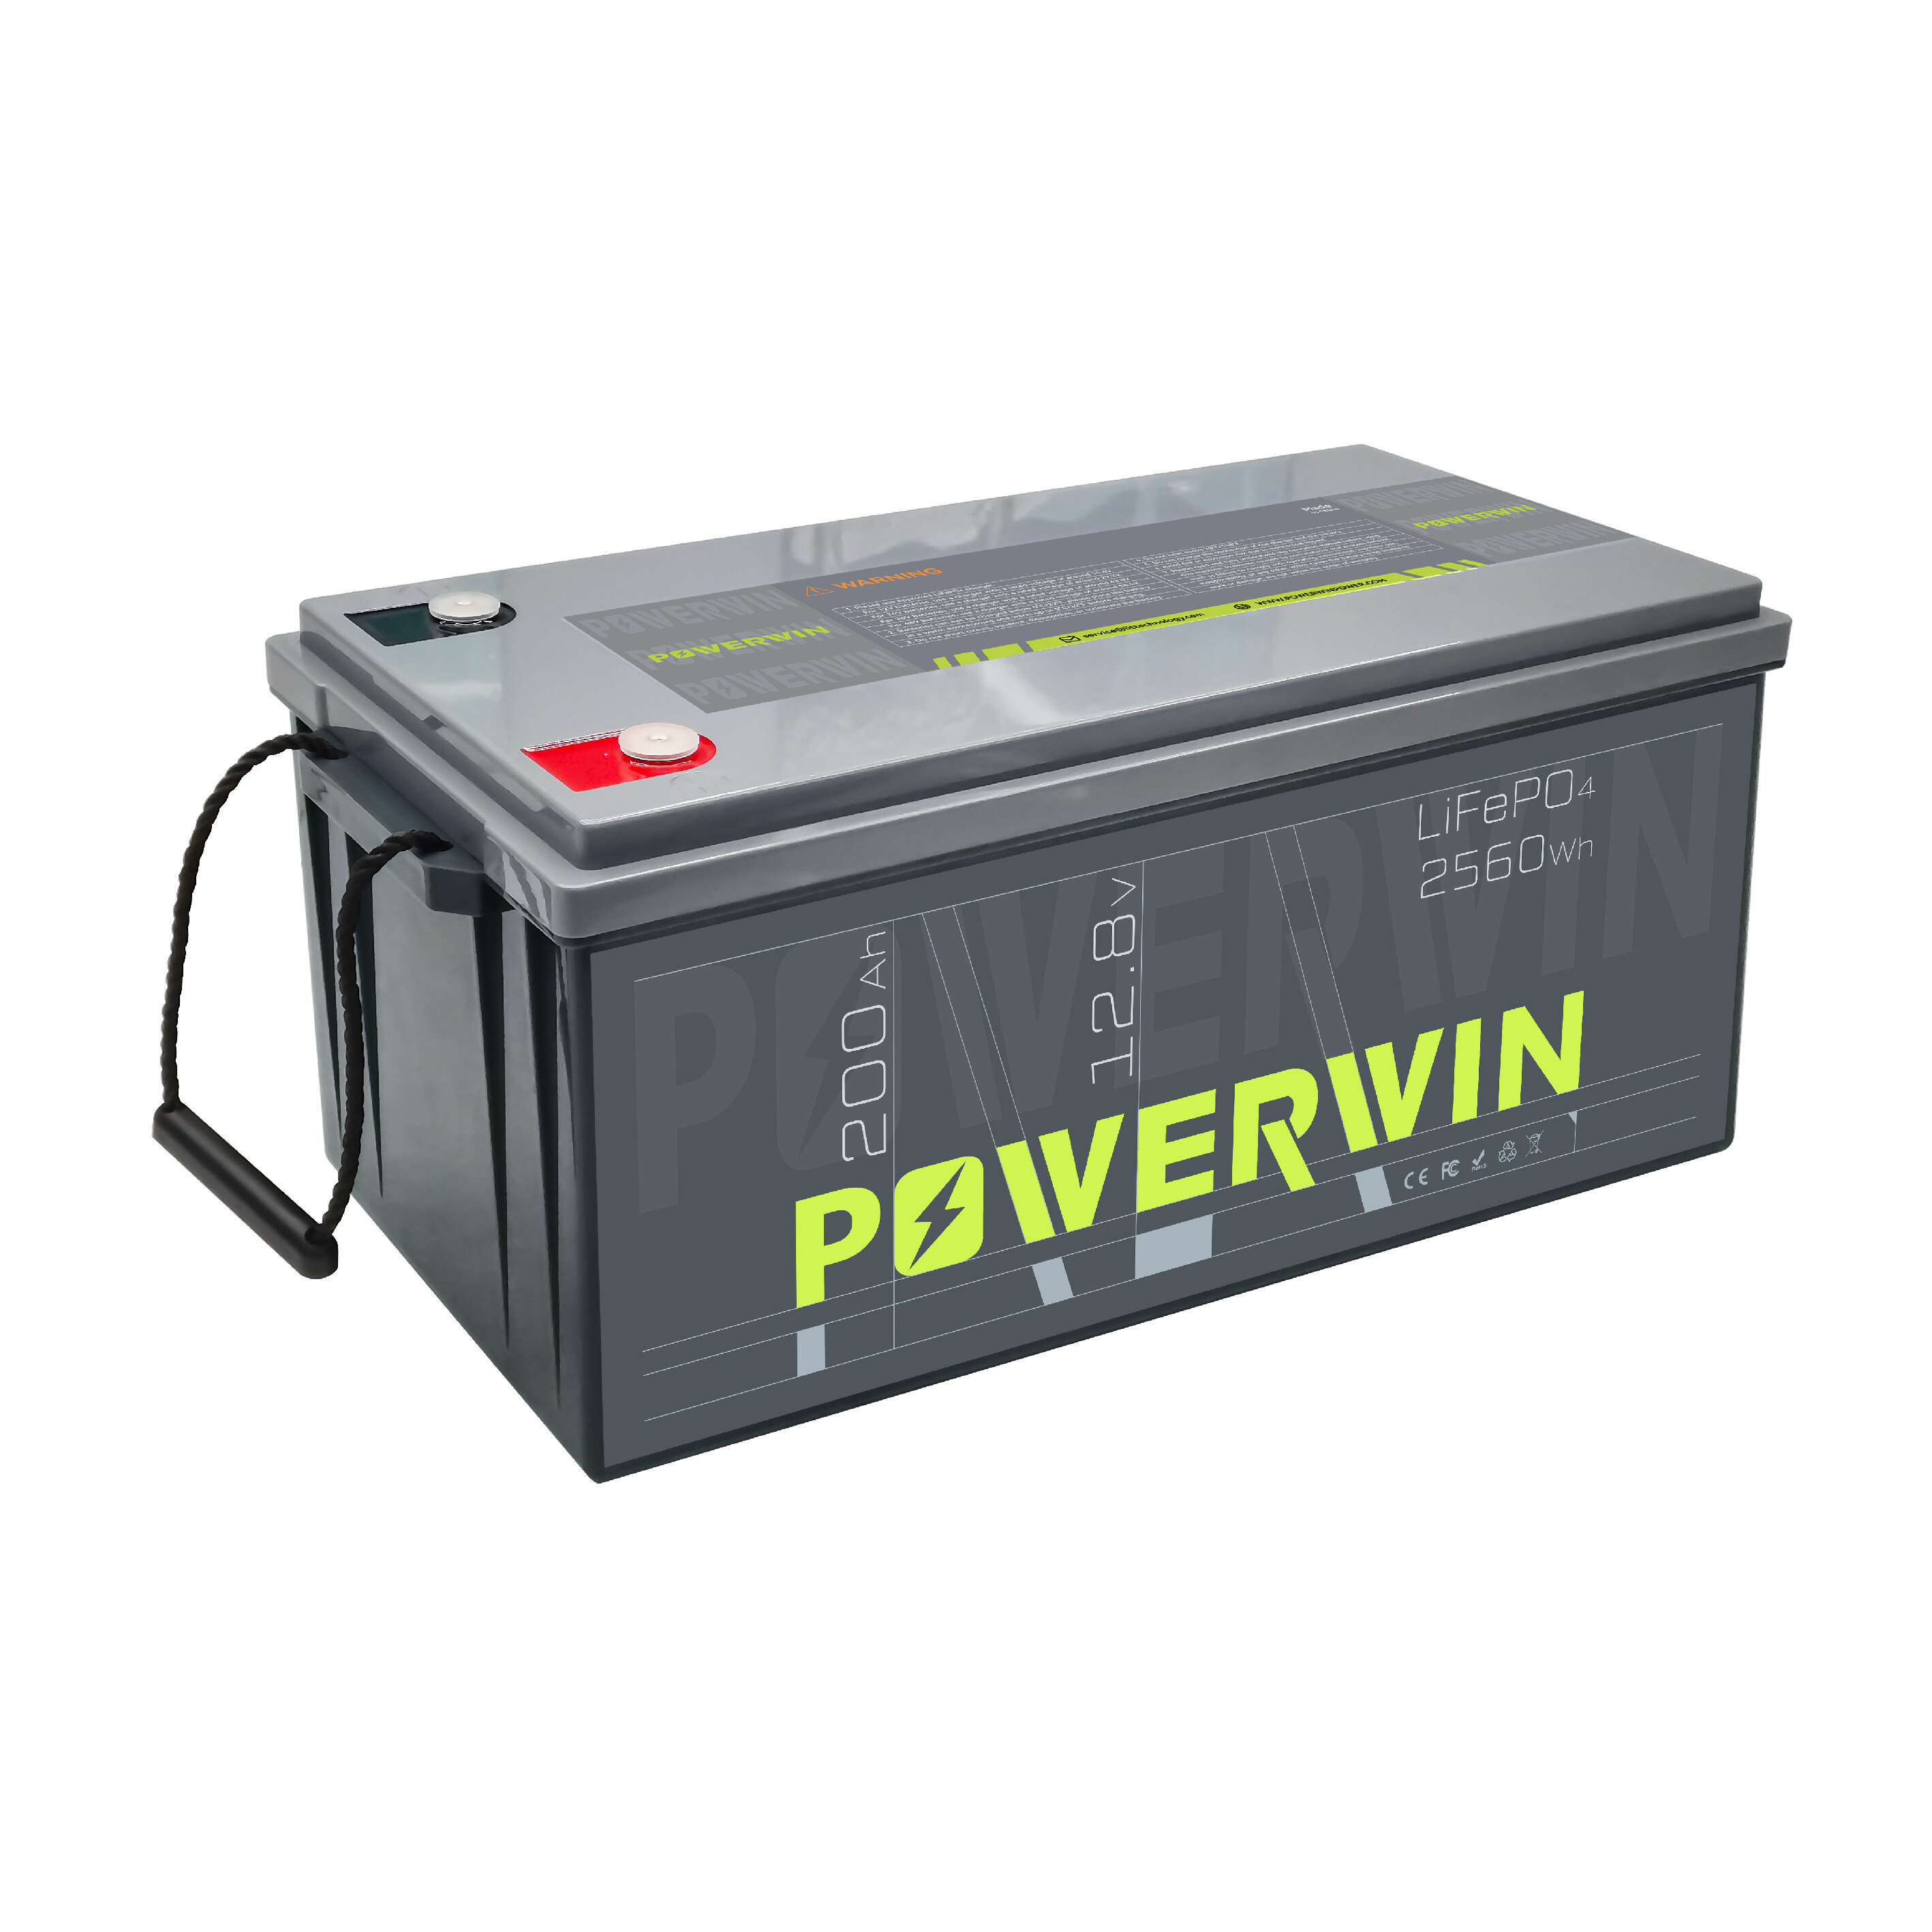 POWERWIN 12.8V 200Ah LiFePO4 Battery Built-in 100A BMS Fully Charged in 2560Wh Perfect For RV, Camping, Solar System, Outages